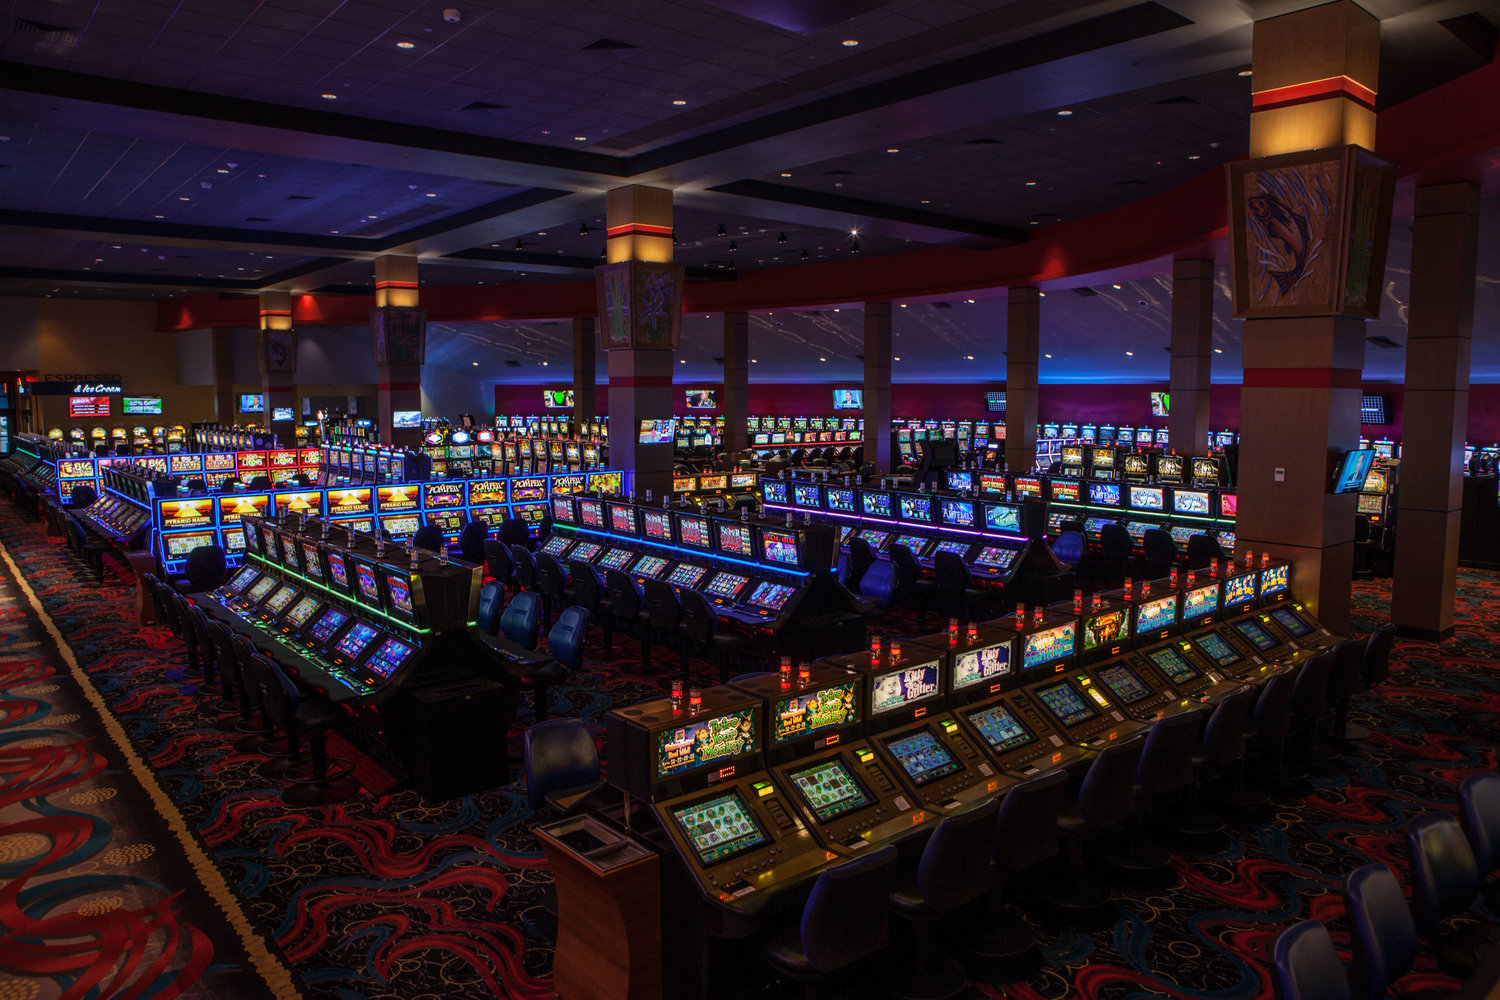 This new smoke-free gaming room features 1,400 slots and is part of the Nisqually Indian Tribes expansion.